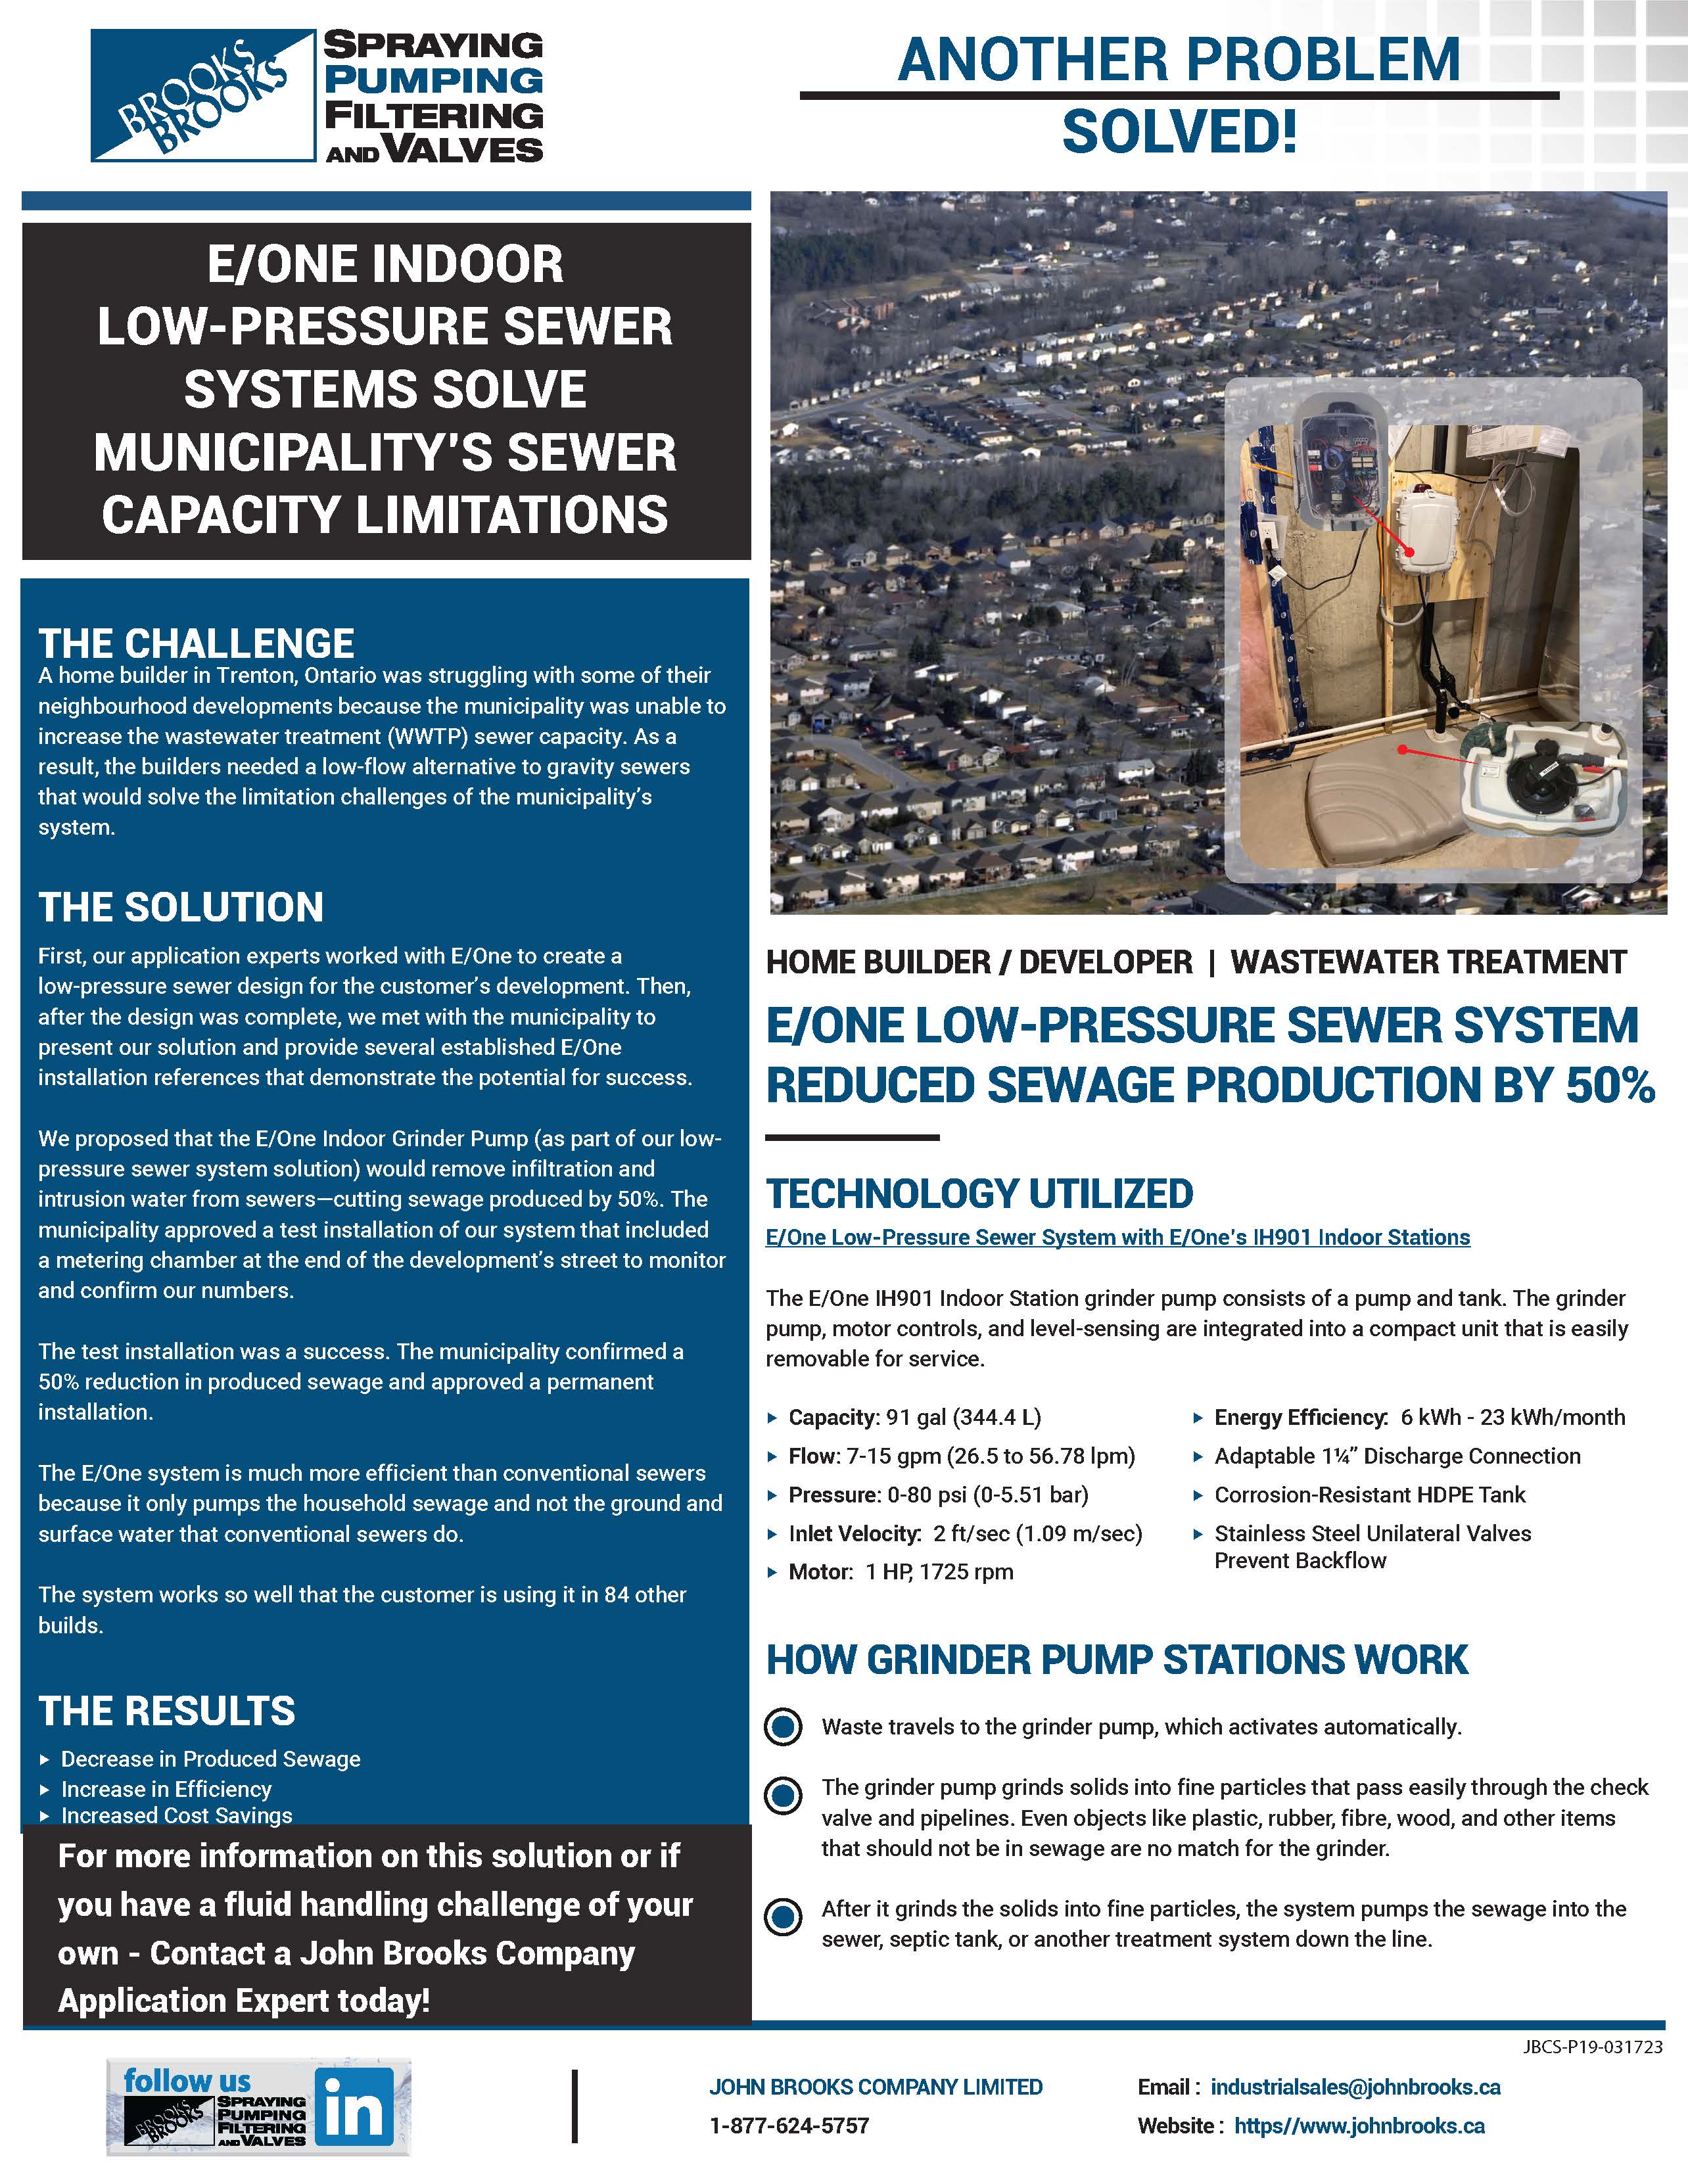 E/One Low Pressure Sewer Systems and Indoor Grinder Pump Decrease Sewage Production